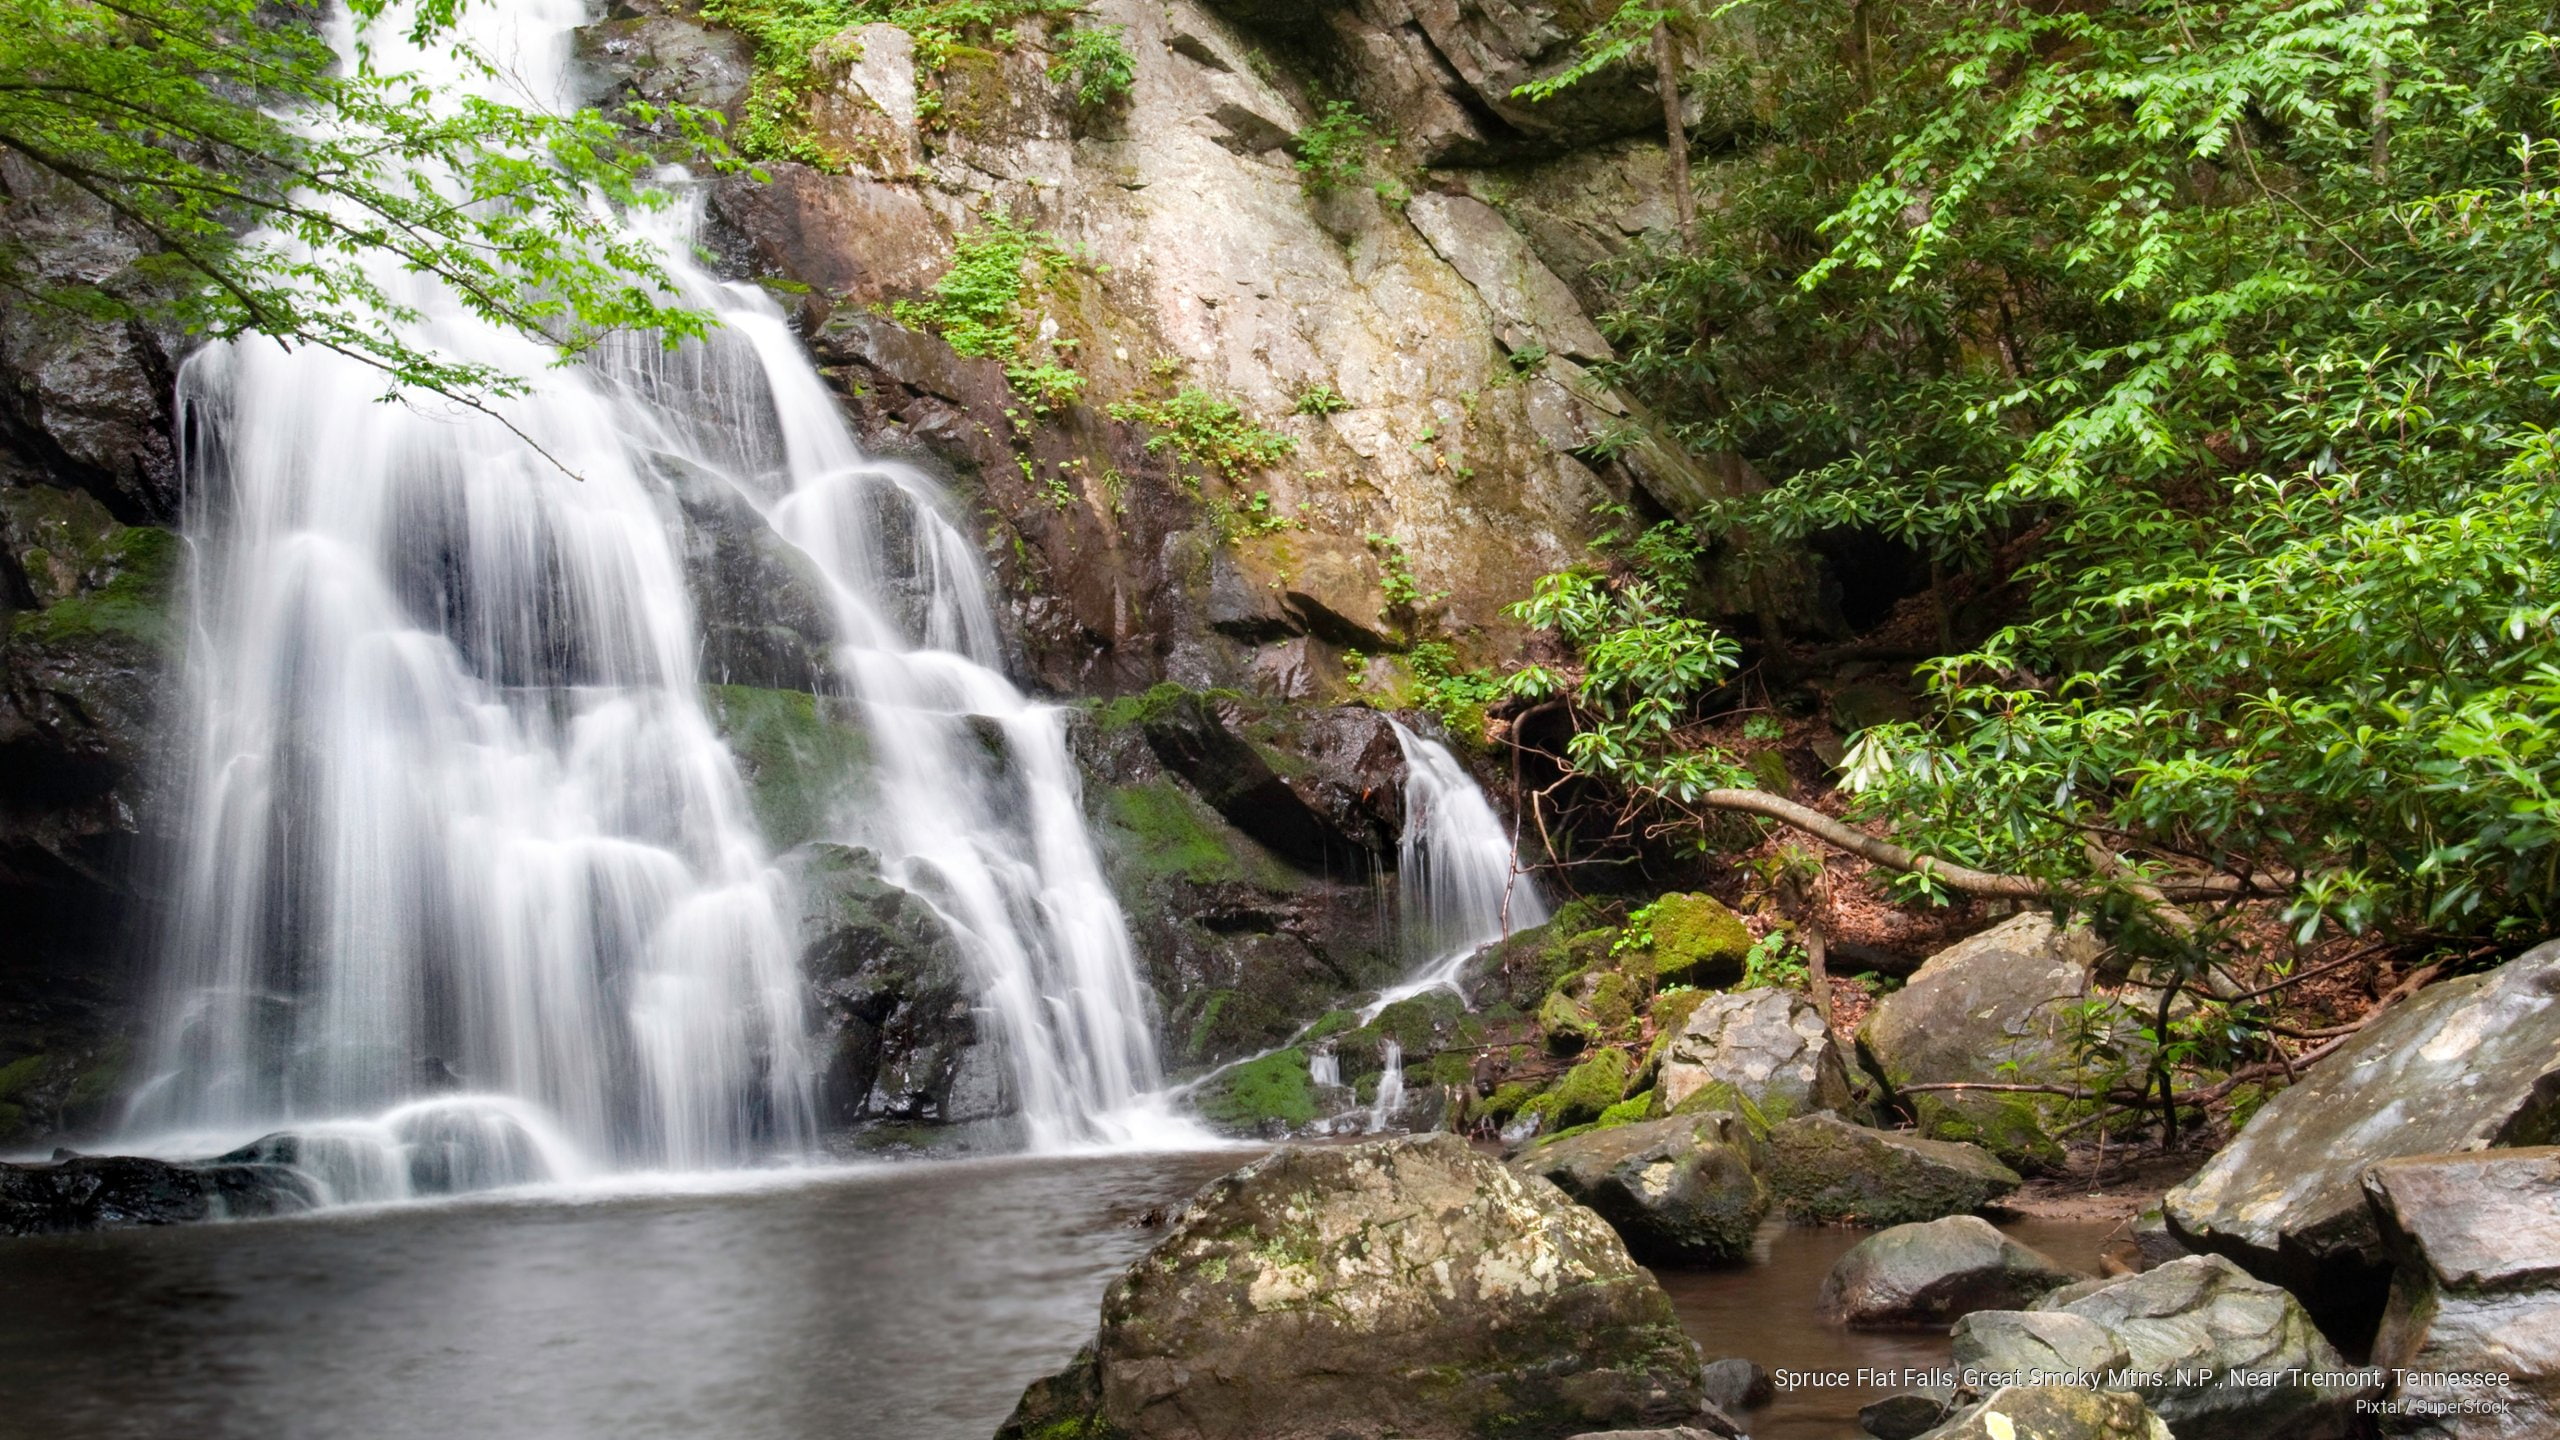 Spruce Flat Falls, Great Smoky Mtns. N.P., Near Tremont, Tennessee